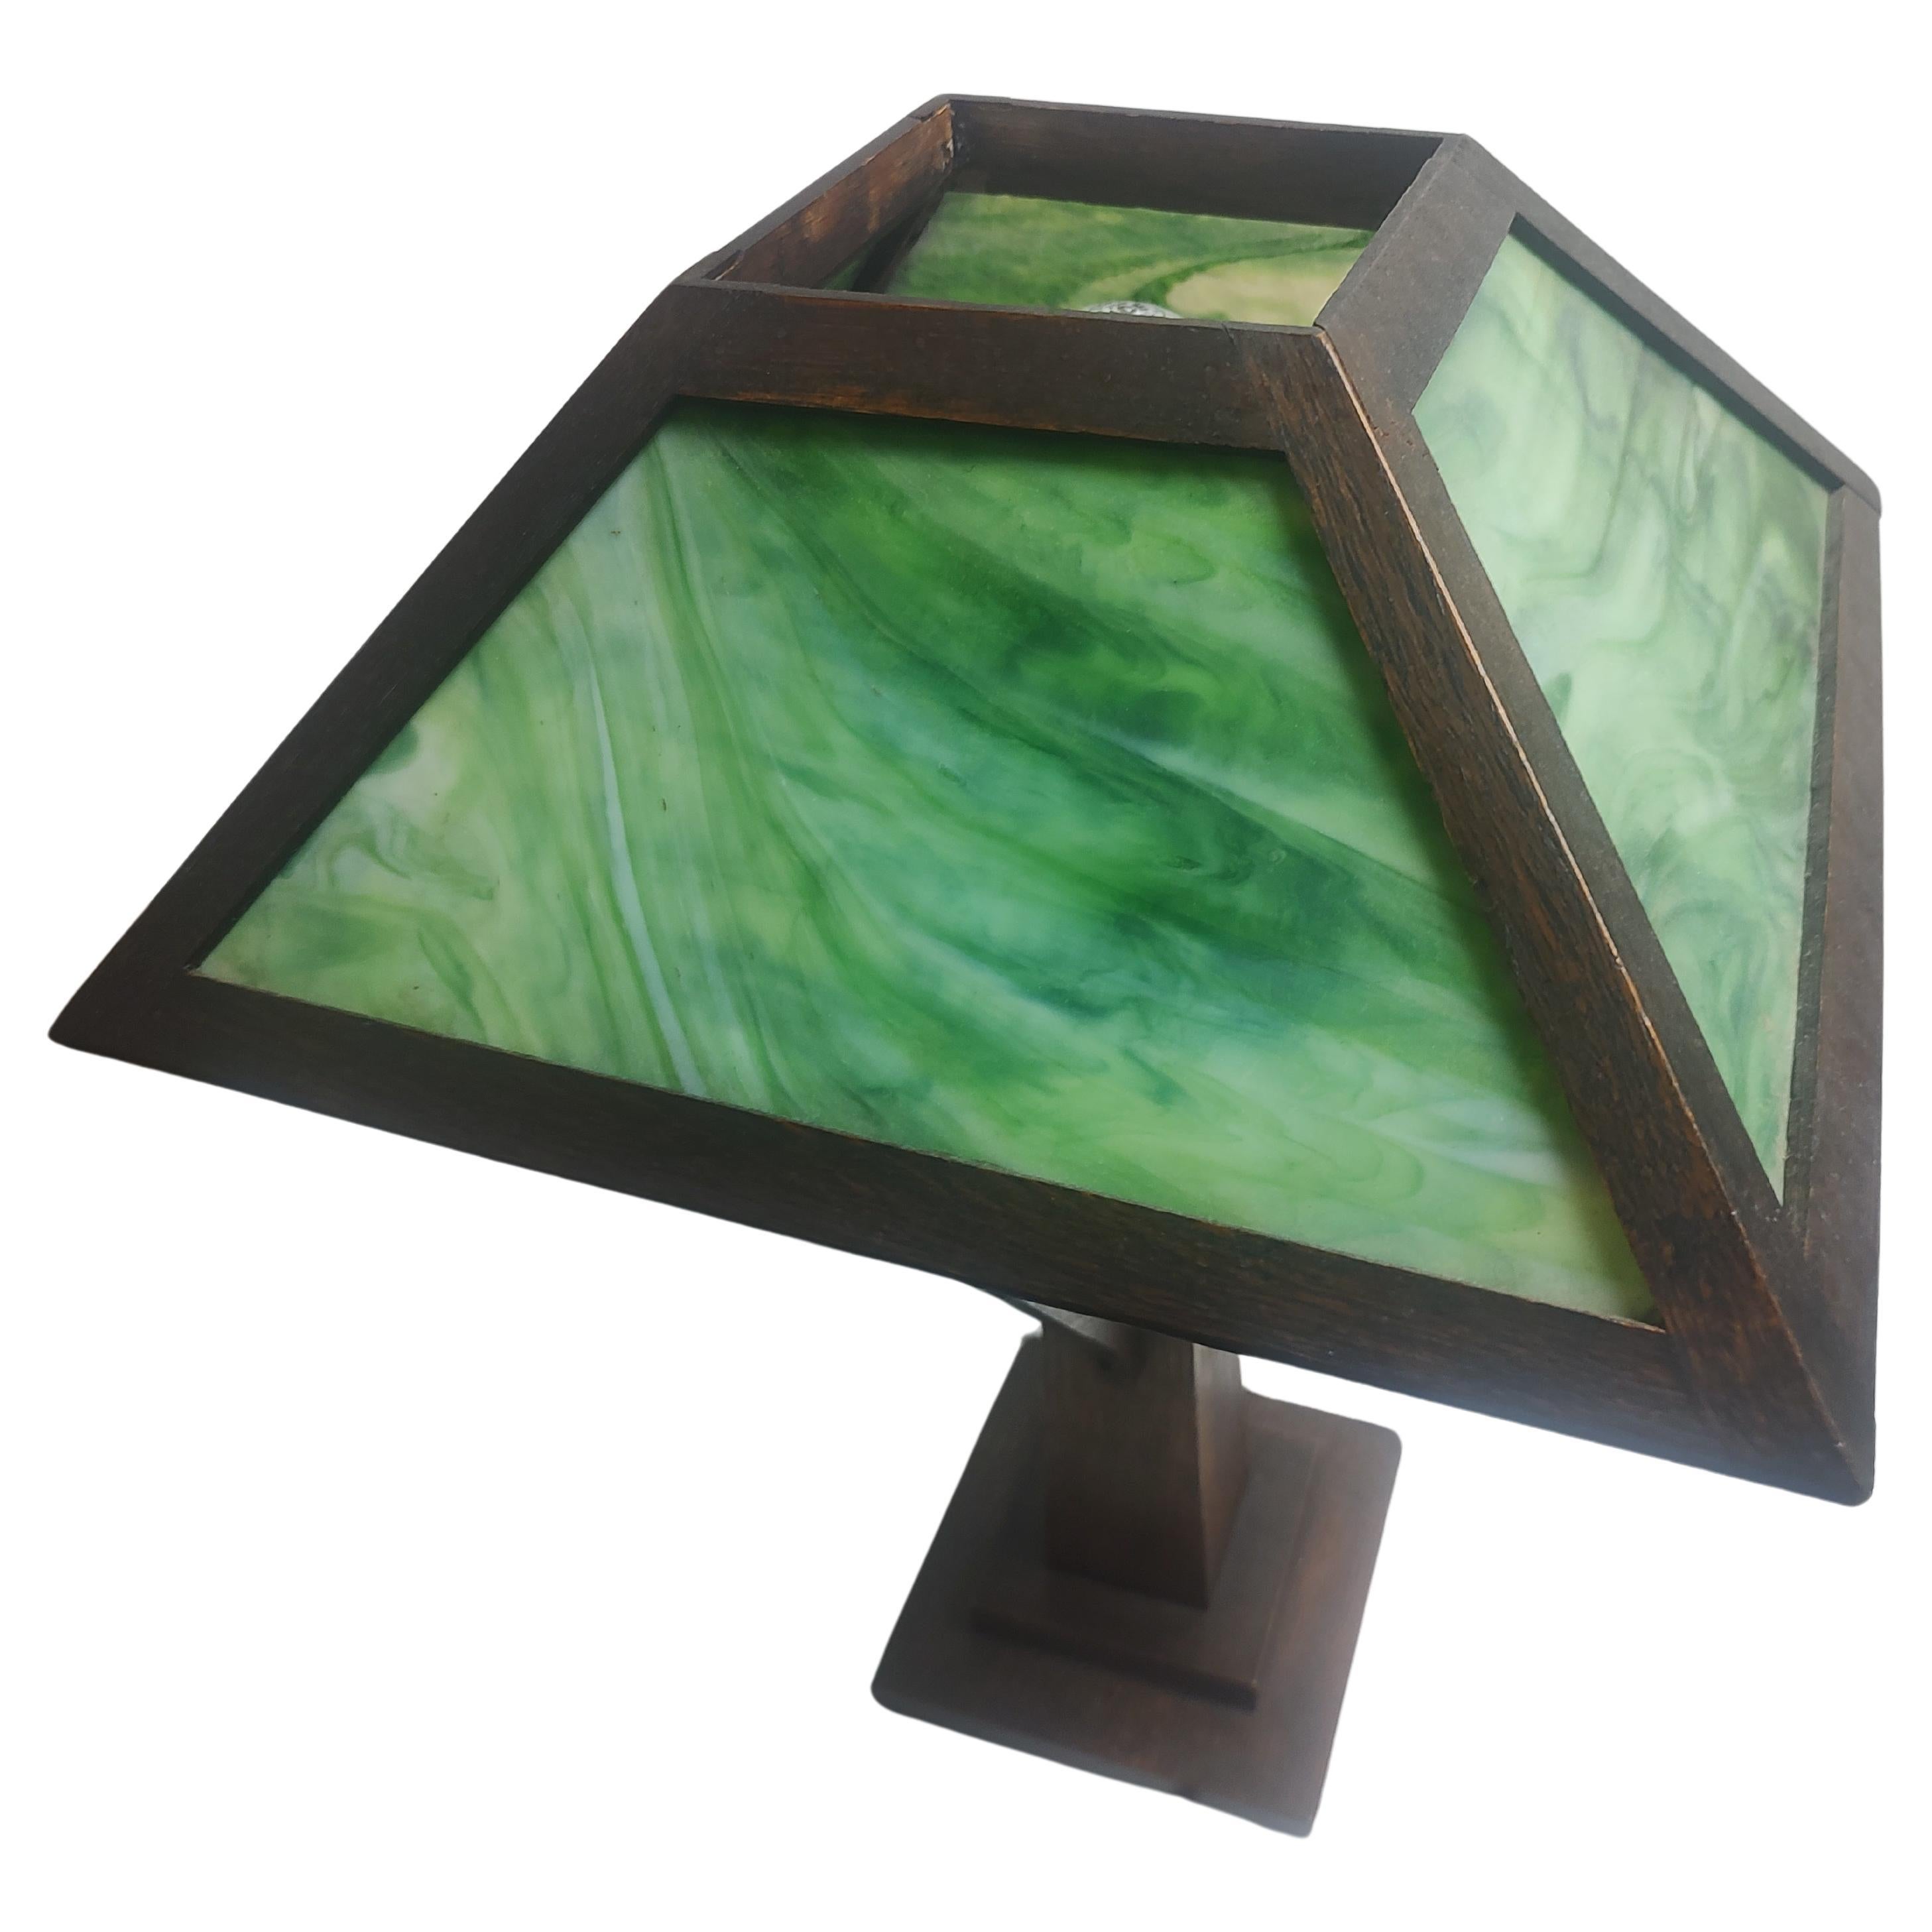 Hand-Crafted Arts & Crafts Mission Oak Table Lamp with Green Slag Glass Late 19thC  For Sale